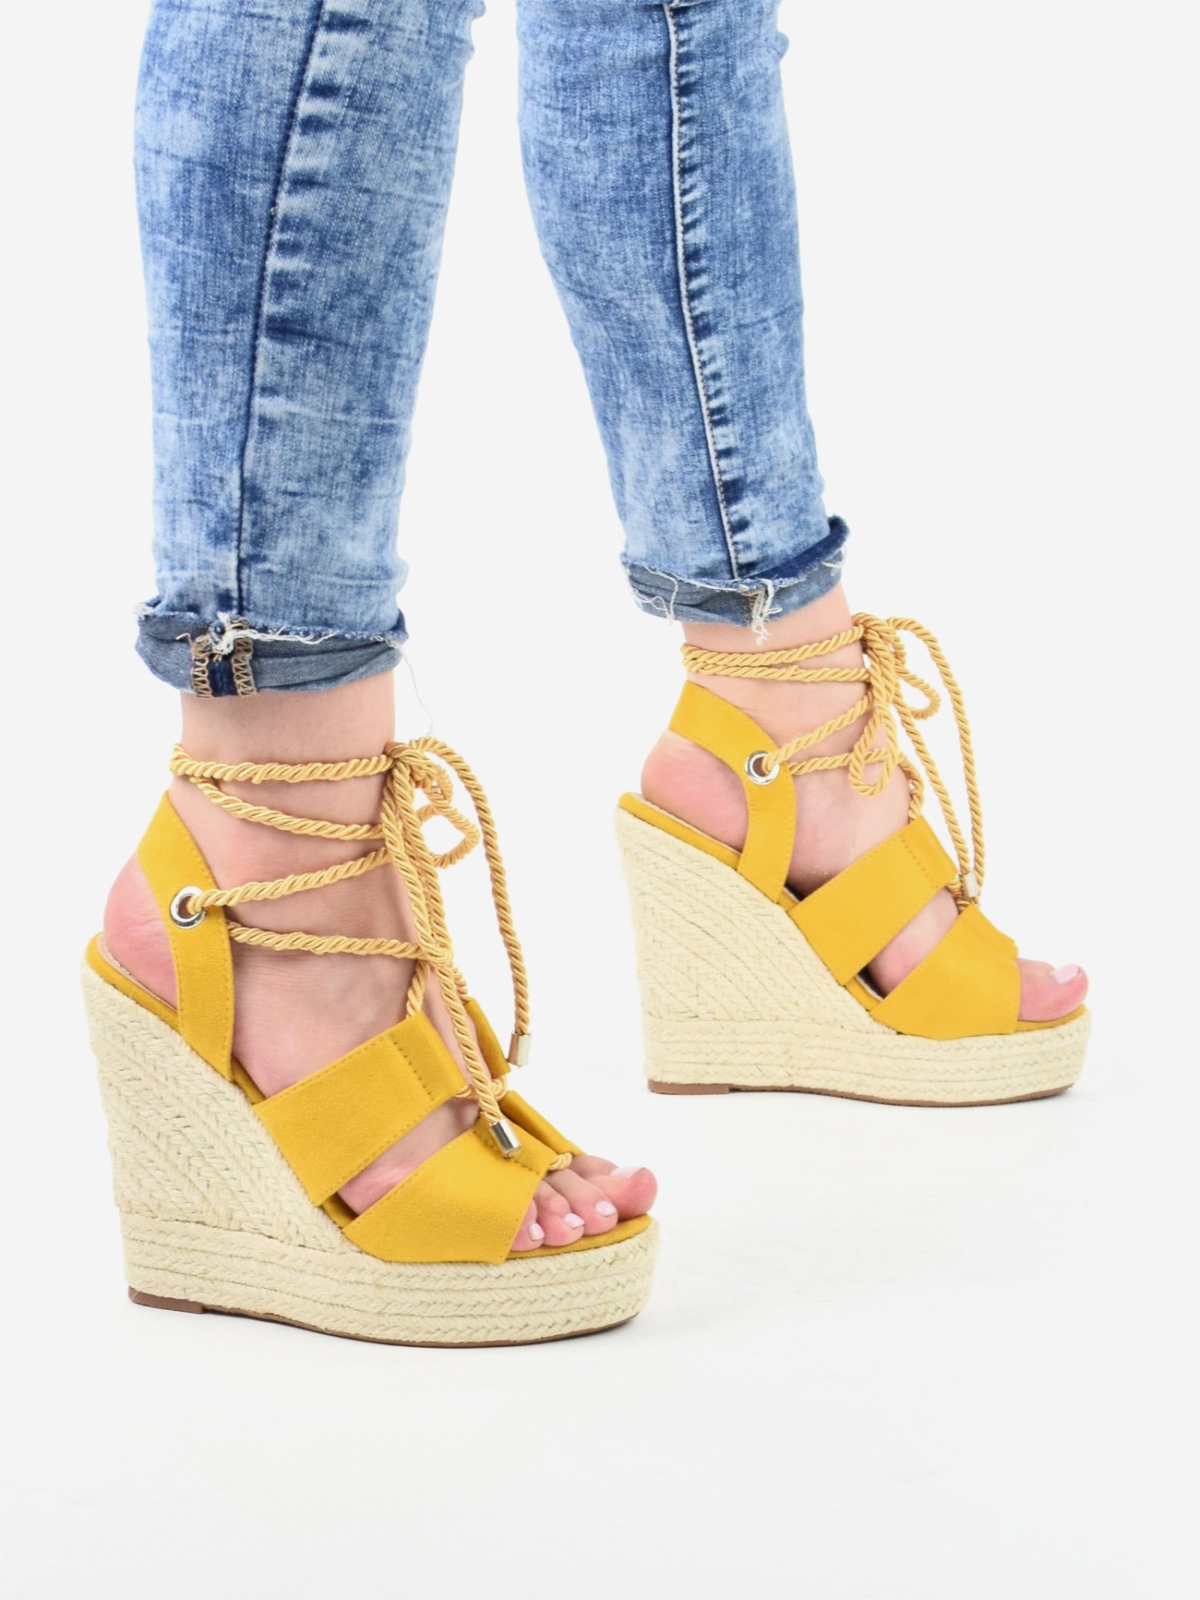 High platform sandals with laces in yellow